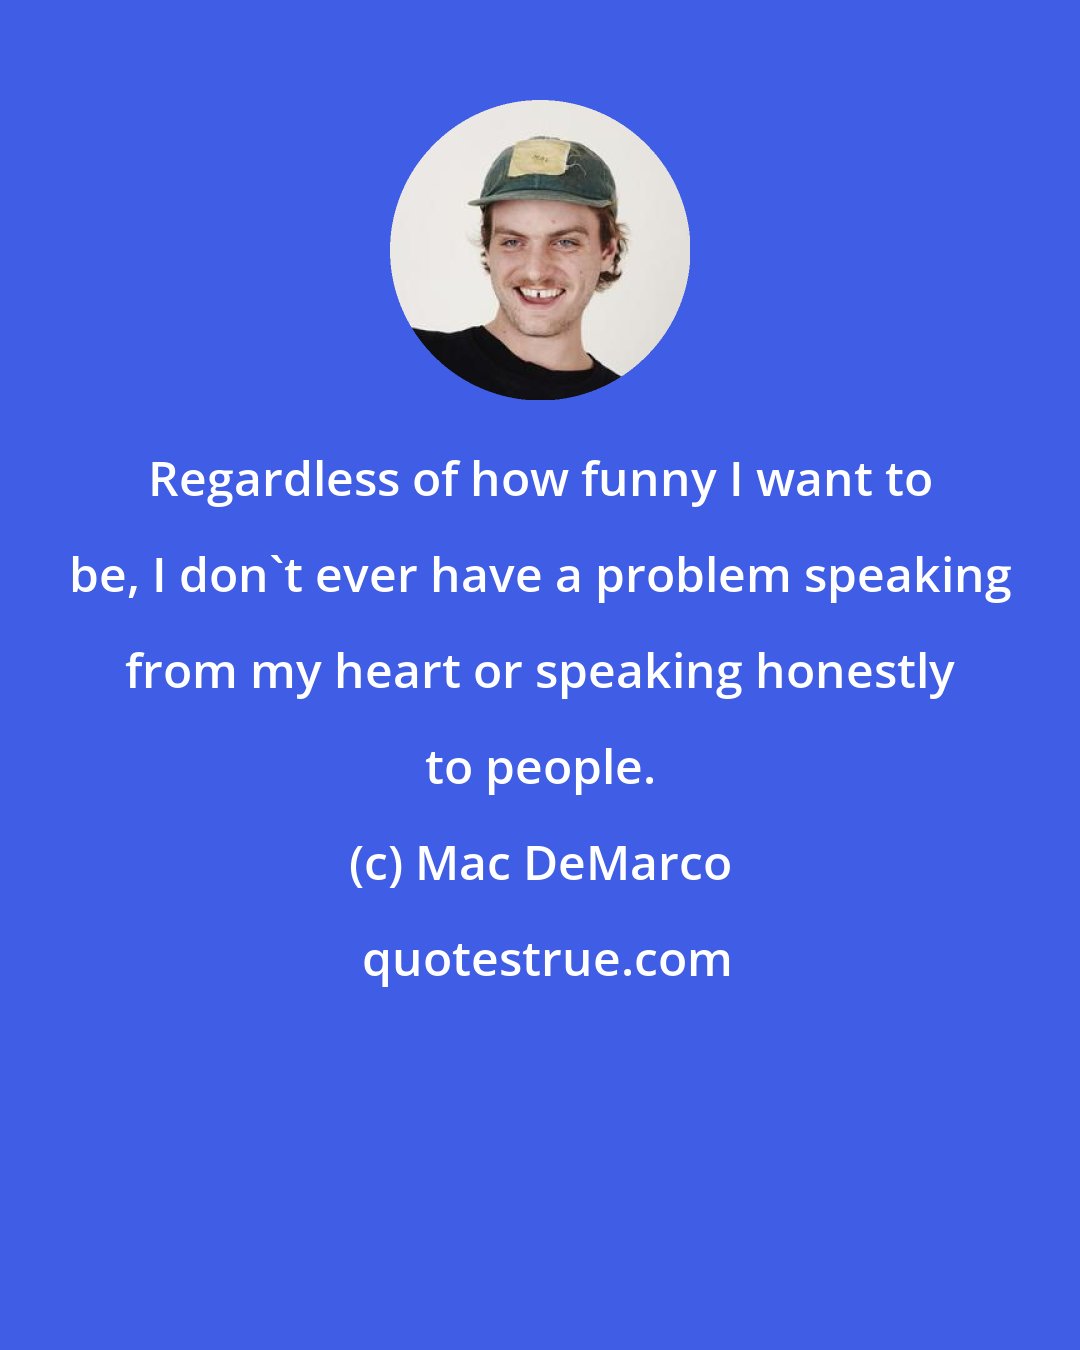 Mac DeMarco: Regardless of how funny I want to be, I don't ever have a problem speaking from my heart or speaking honestly to people.